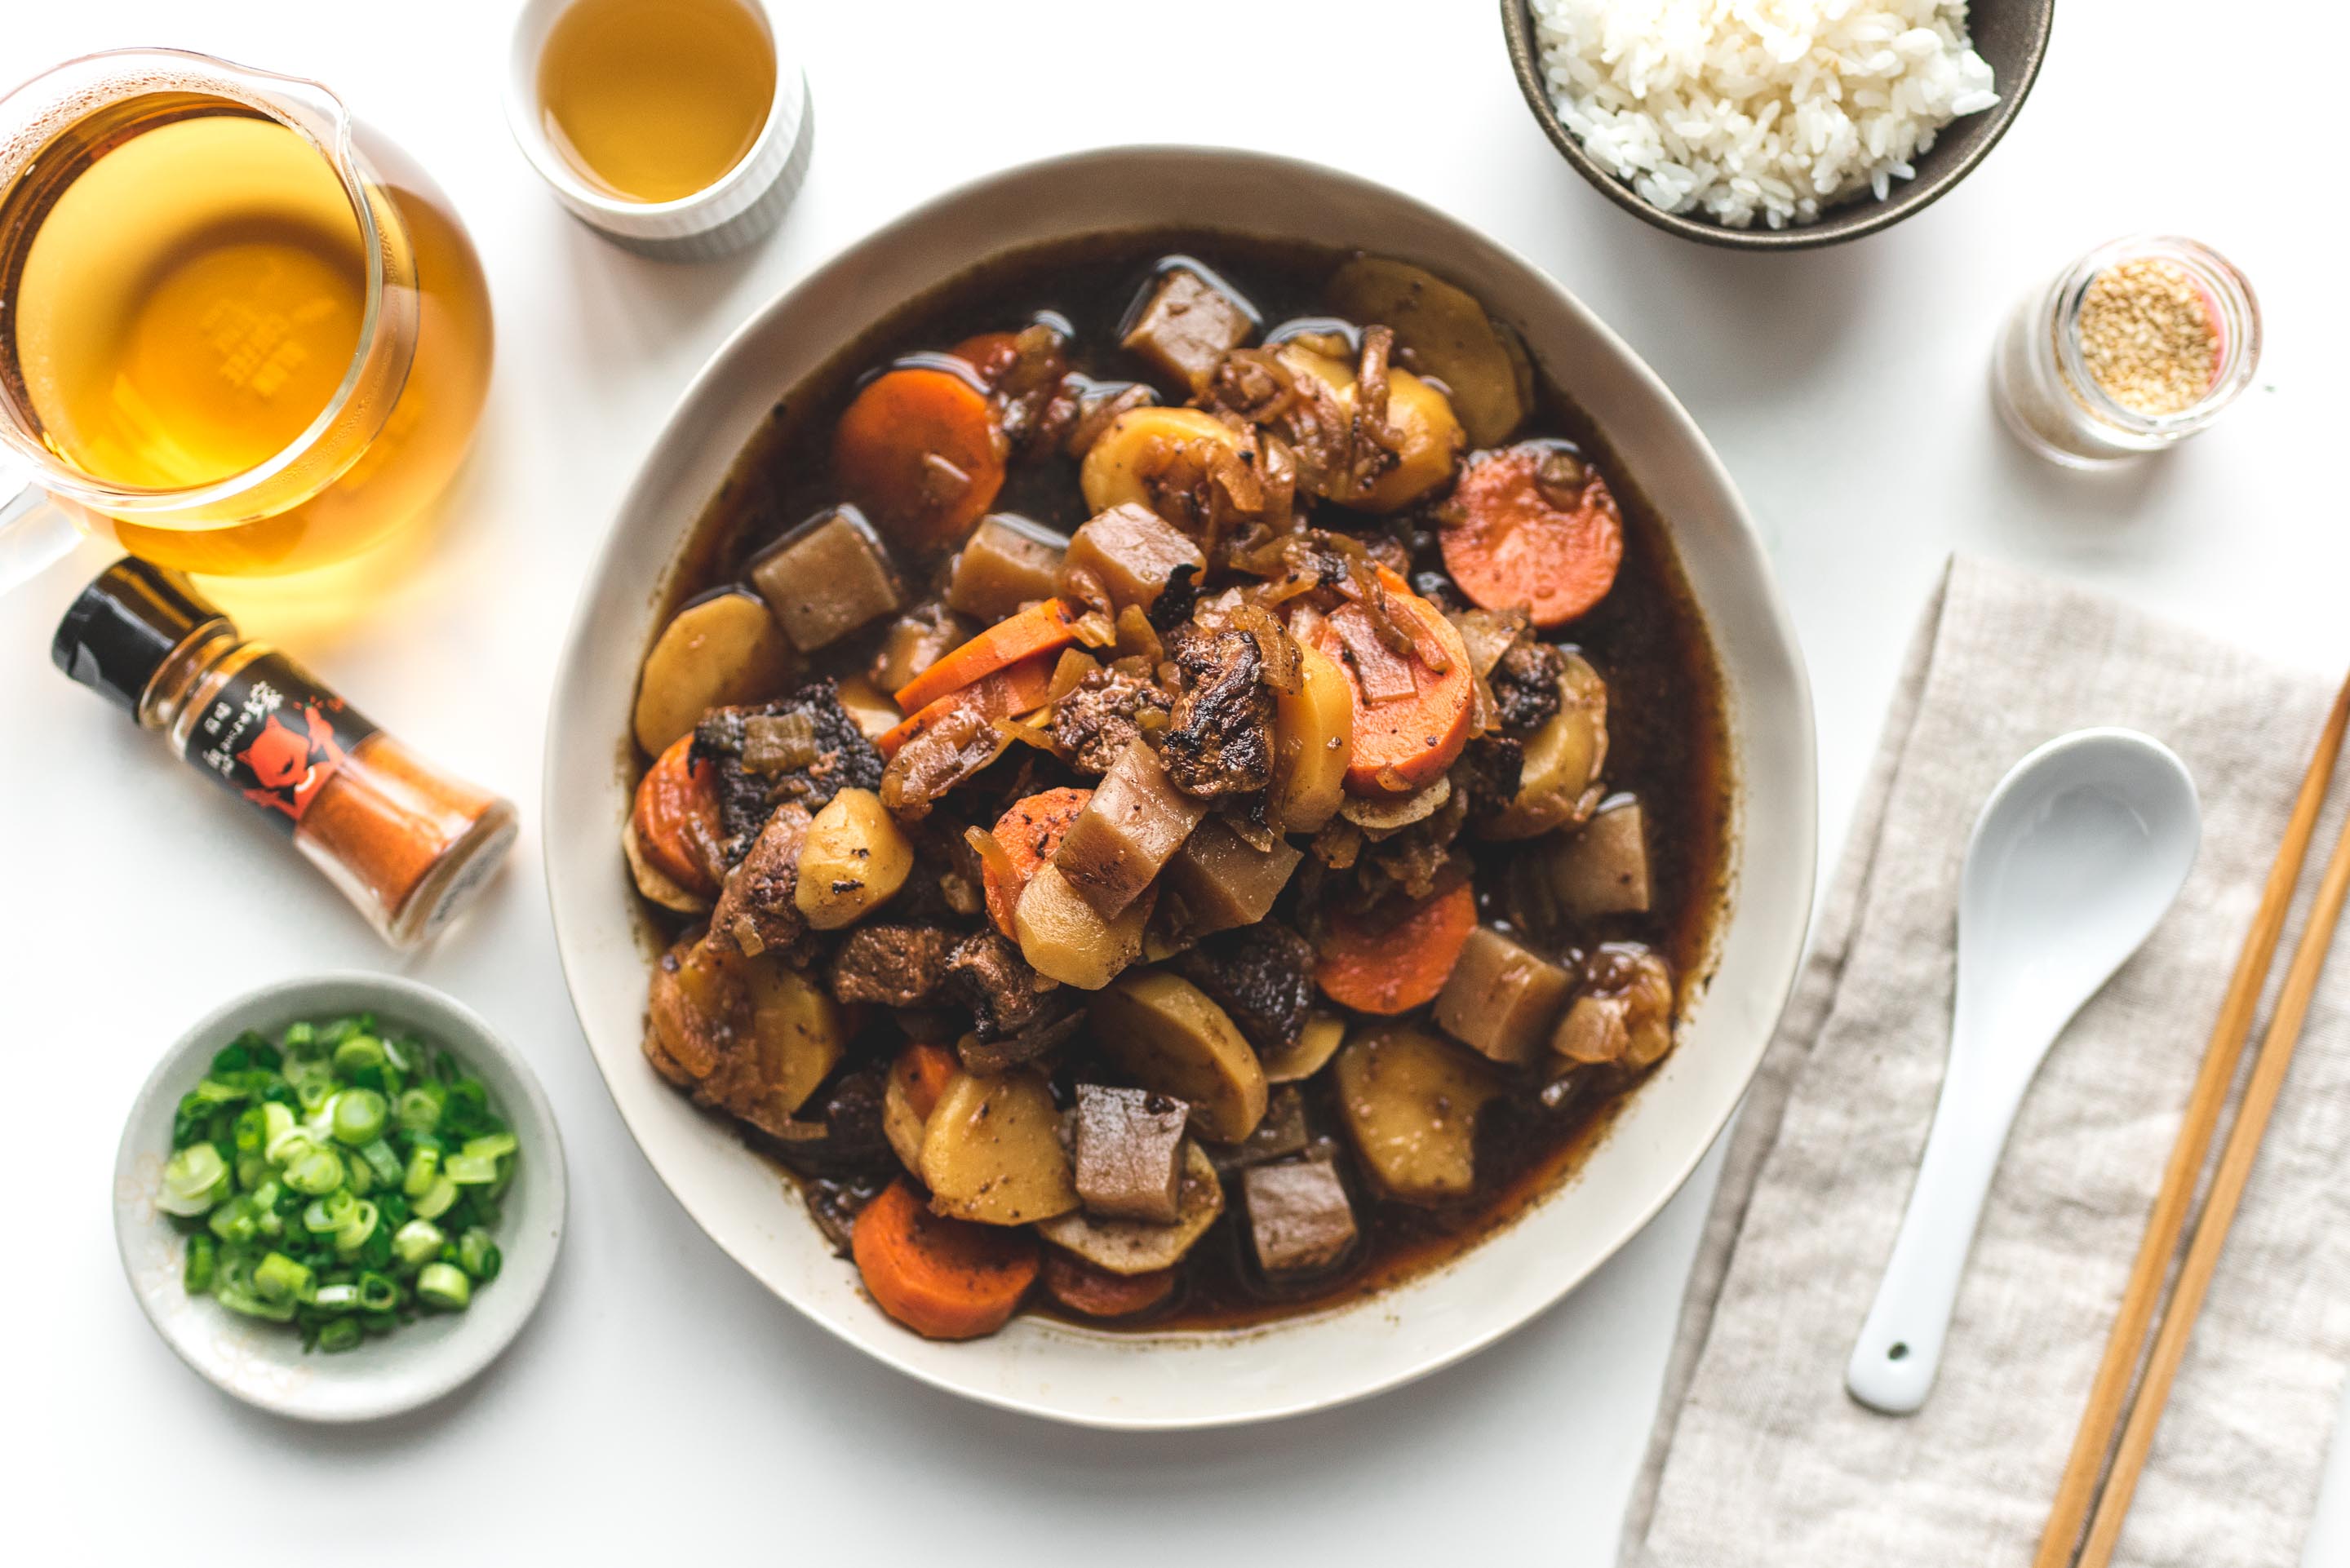 Nikujaga: Japanese Beef Stew Recipe and a Staub giveaway